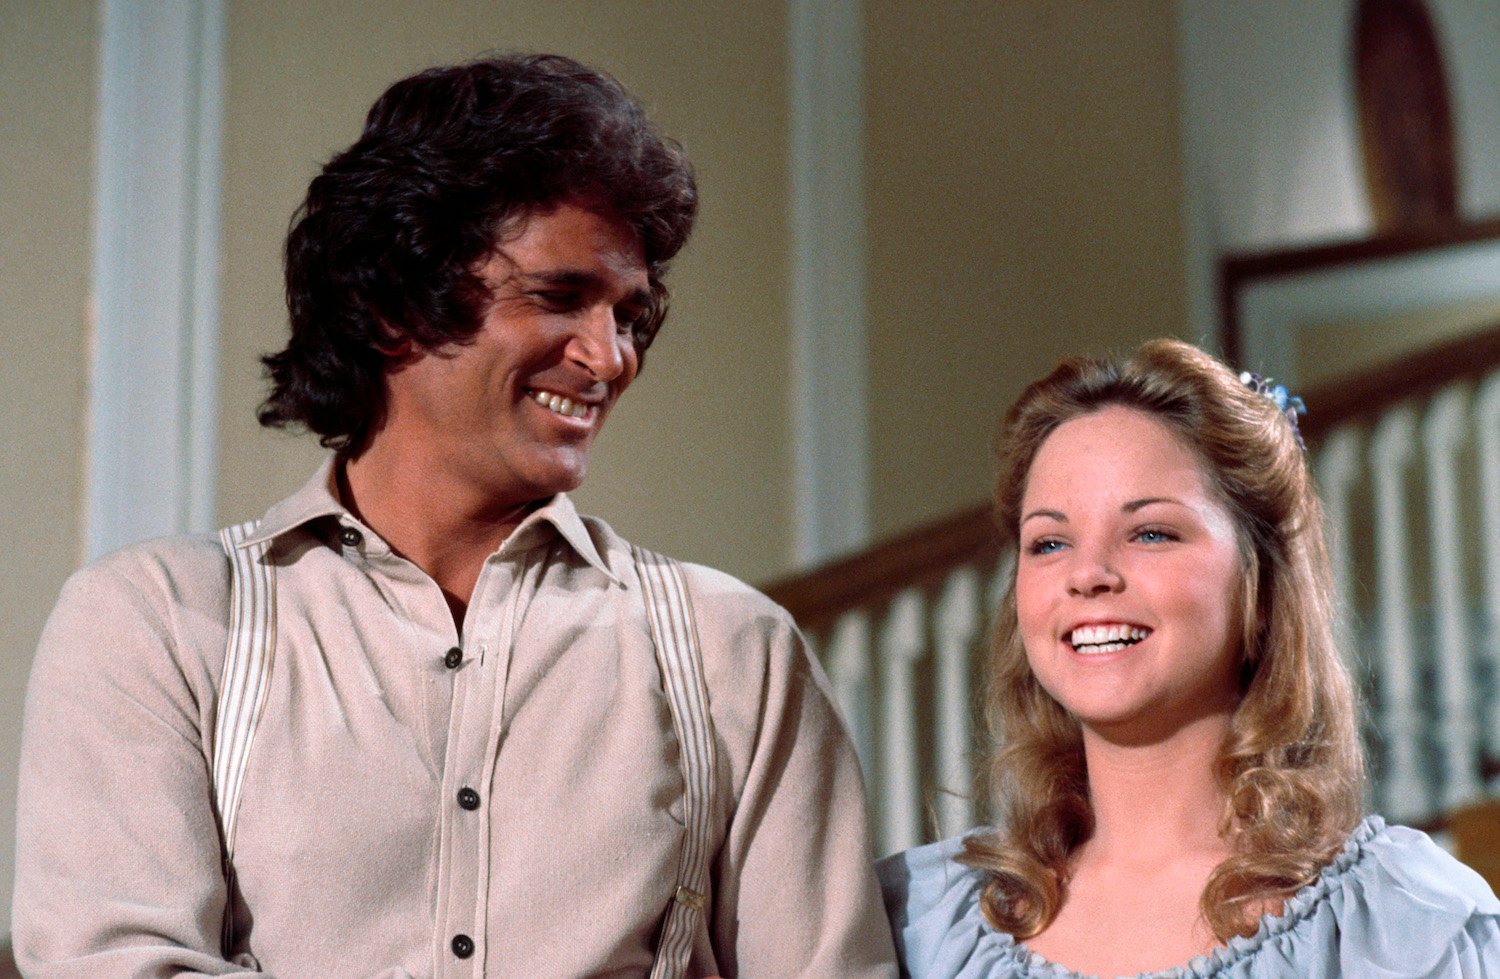 Michael Landon and Melissa Sue Anderson laughing next to each other in 'Little House on the Prairie'